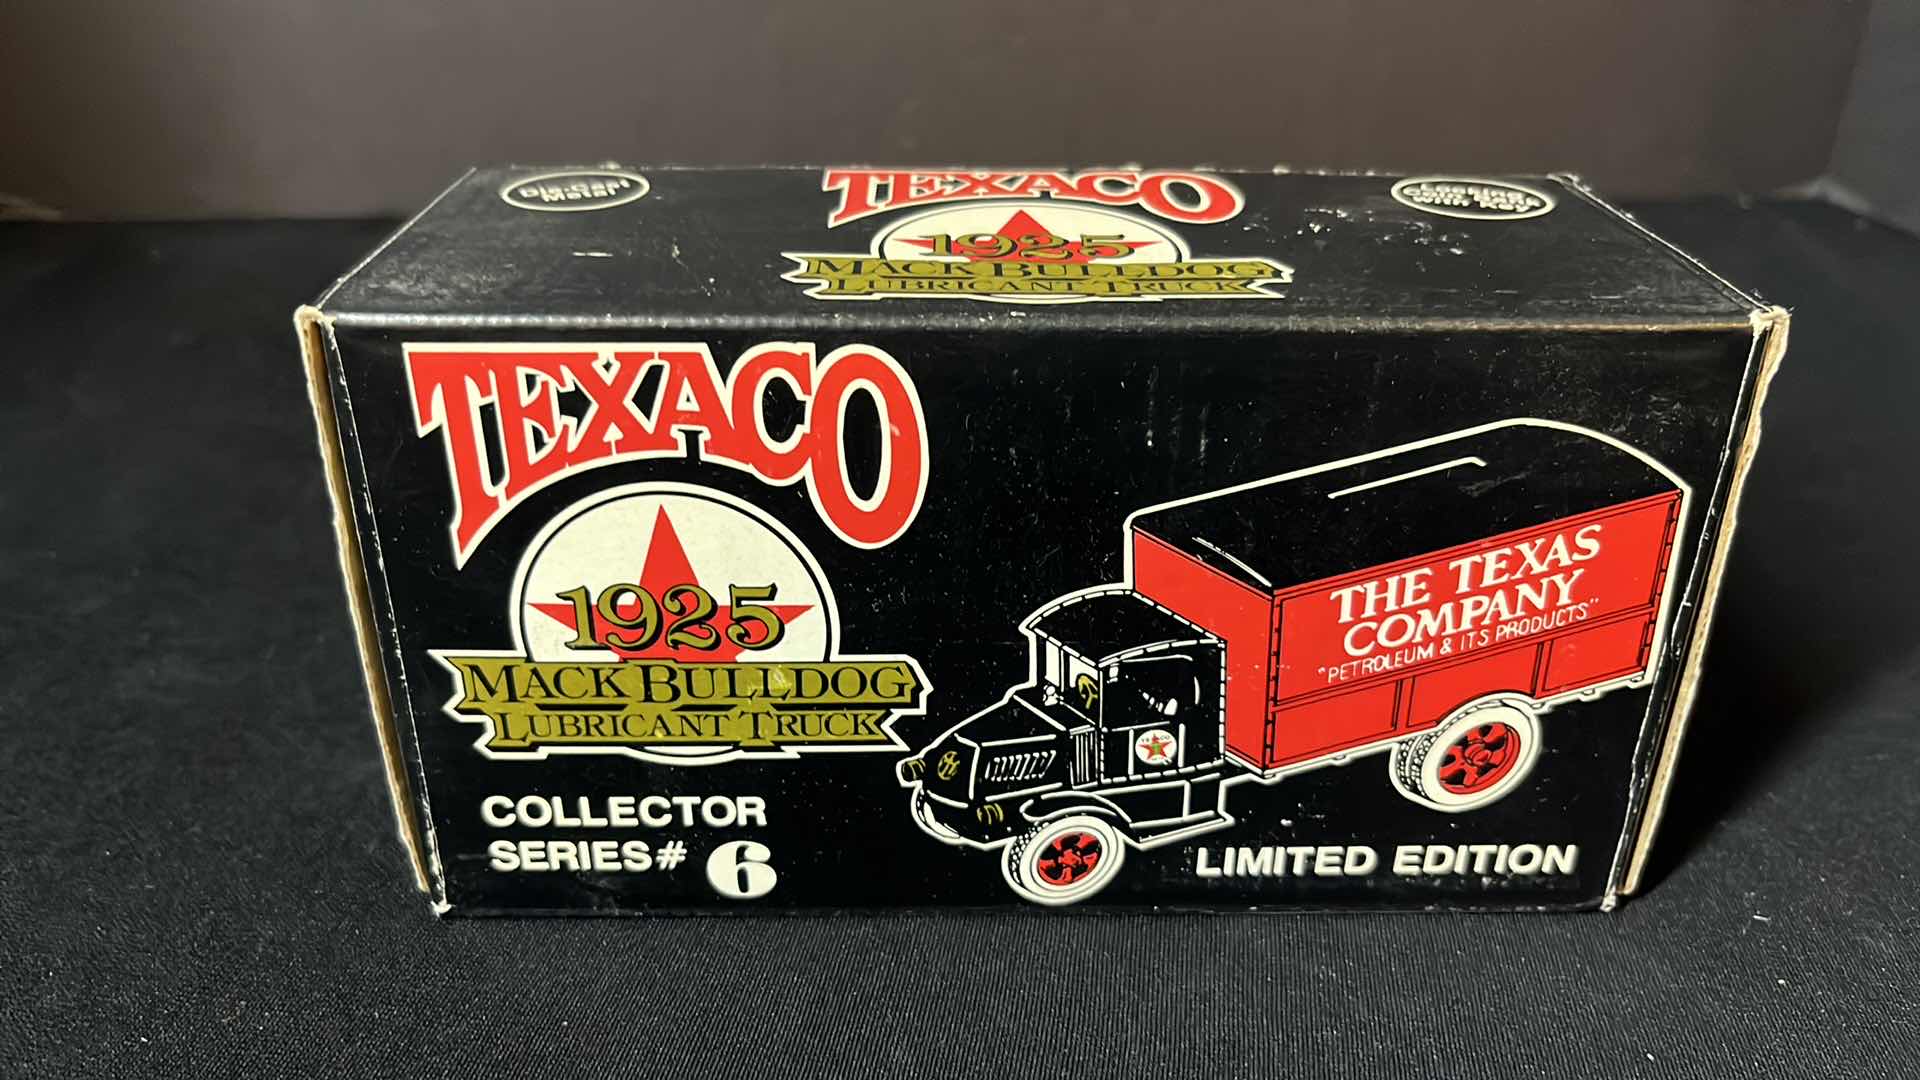 Photo 6 of ERTL DIE-CAST METAL LIMITED EDITION TEXACO 1925 MACK BULLDOG LUBRICANT TRUCK LOCKING COIN BANK W KEY, COLLECTORS SERIES #6, 1989 (STOCK NO 9040VO)